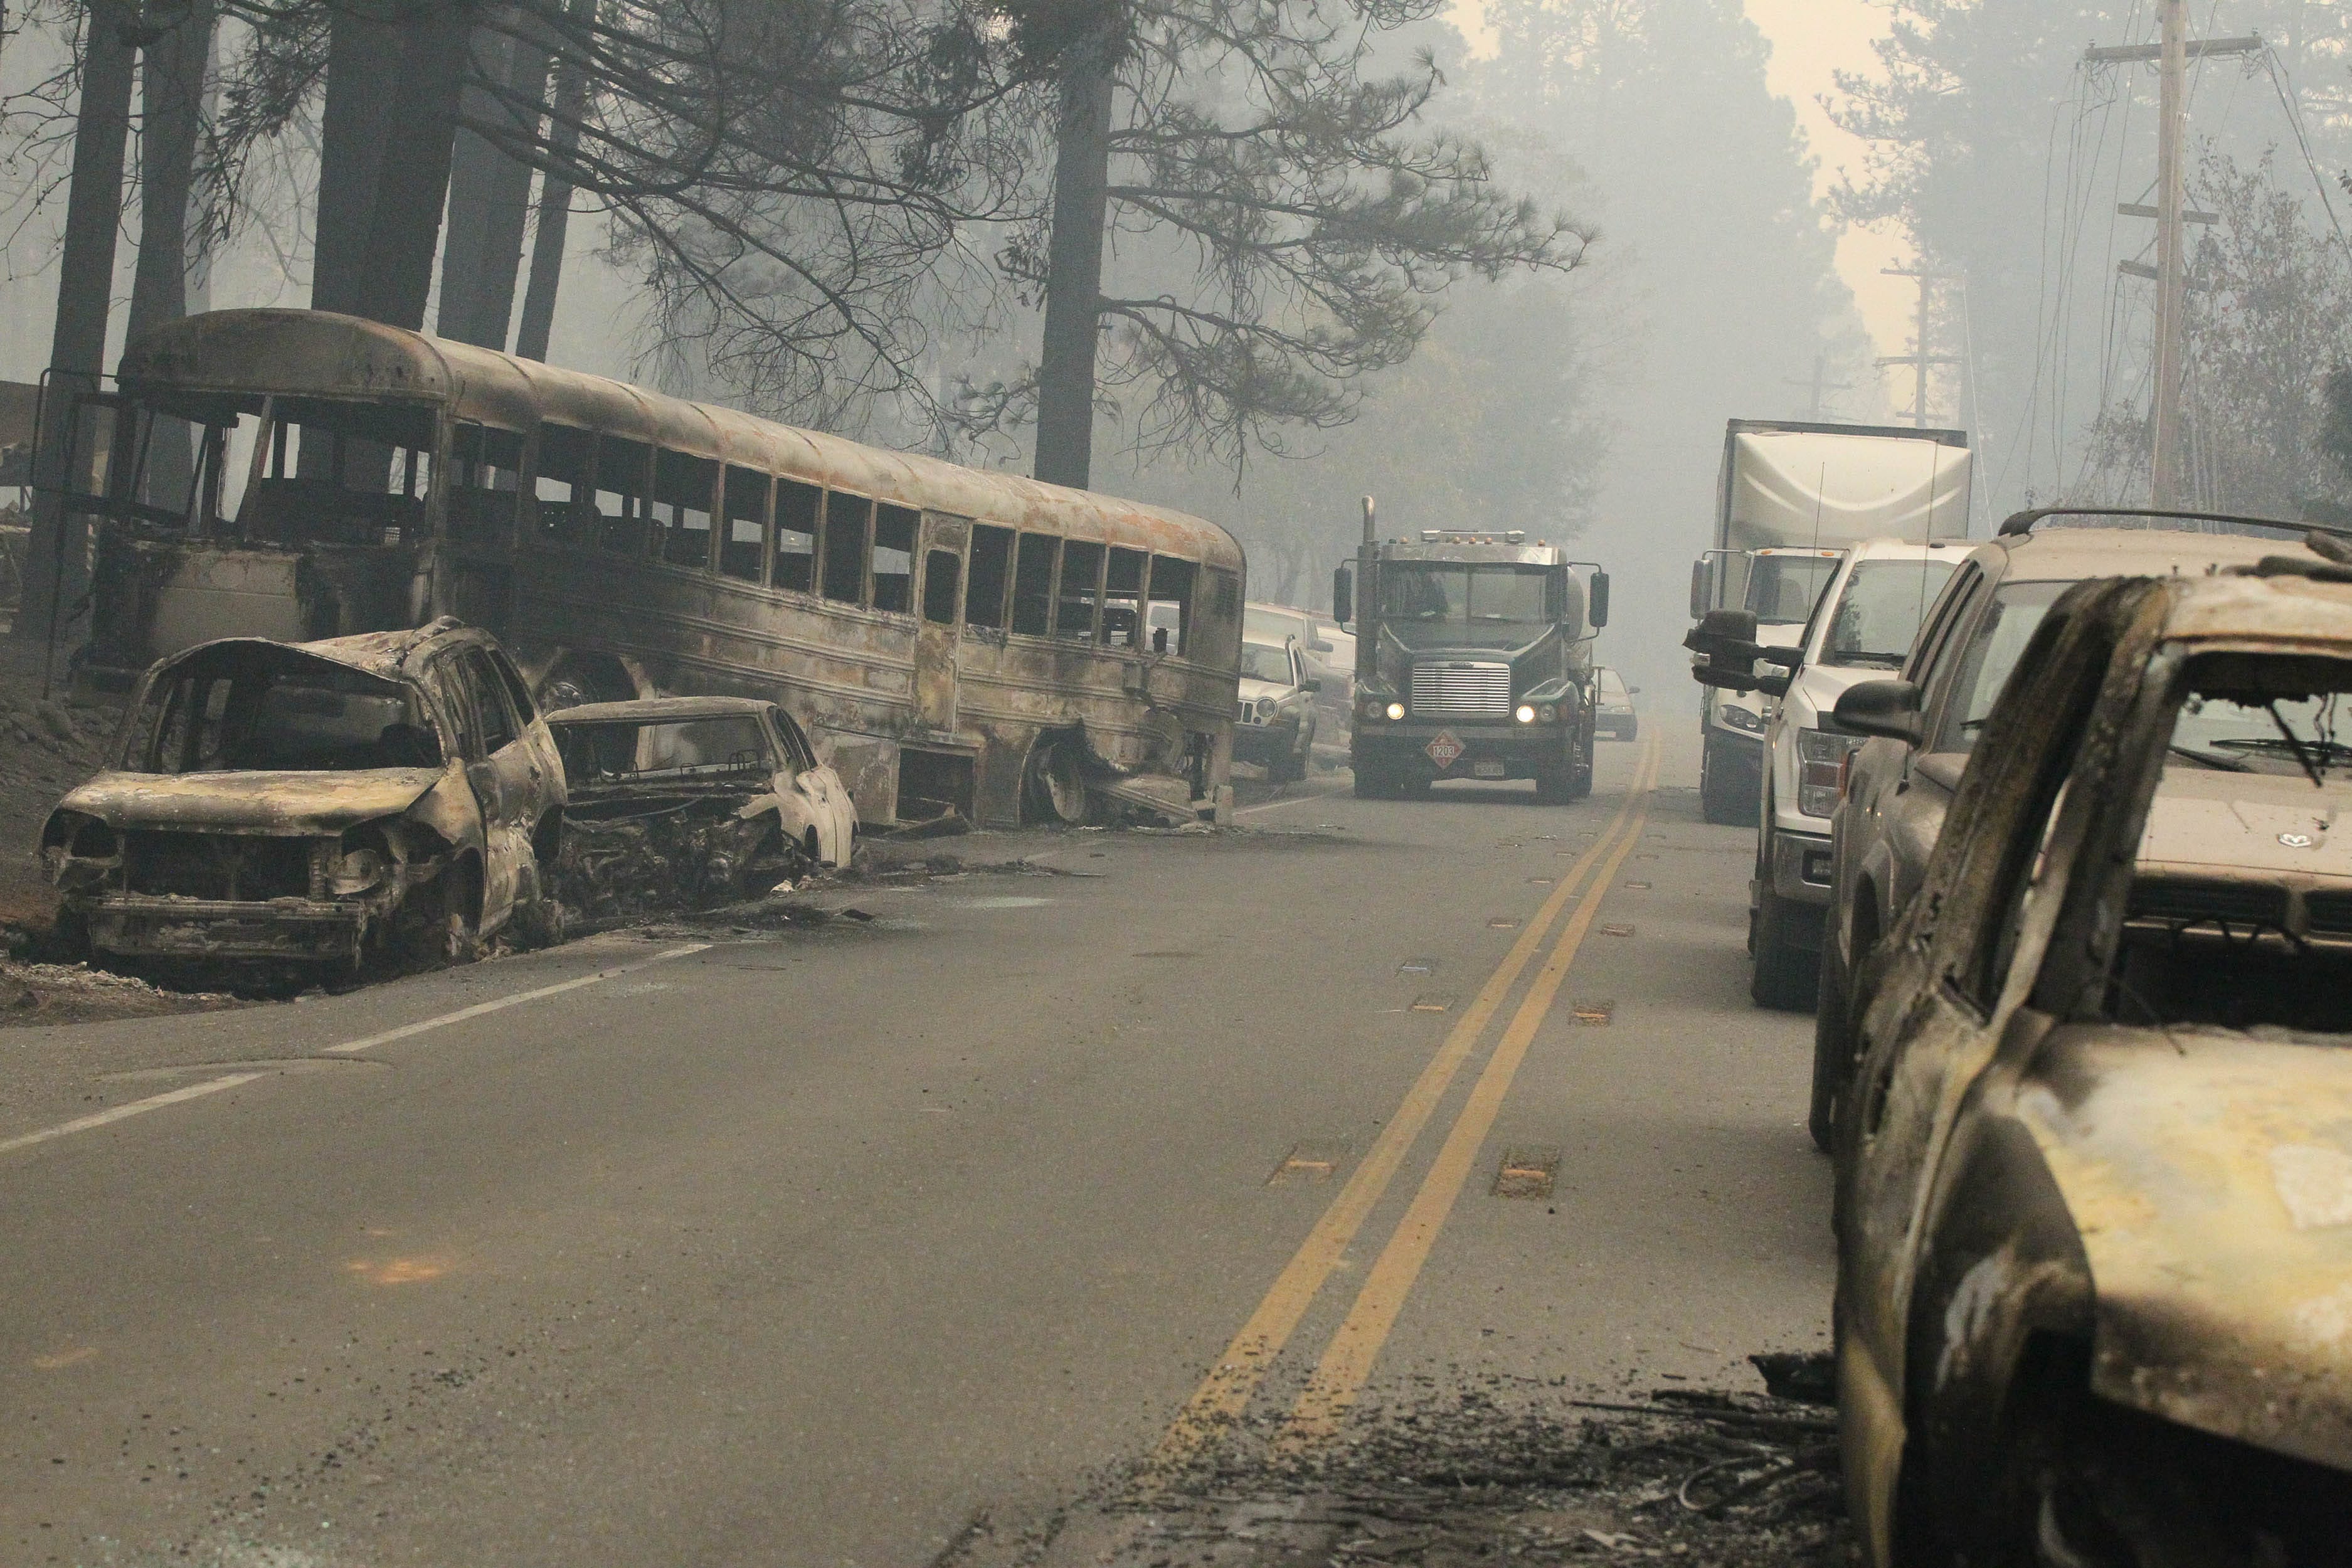 Burned-out vehicles litter roads leading into Paradise in the aftermath of the Camp Fire.